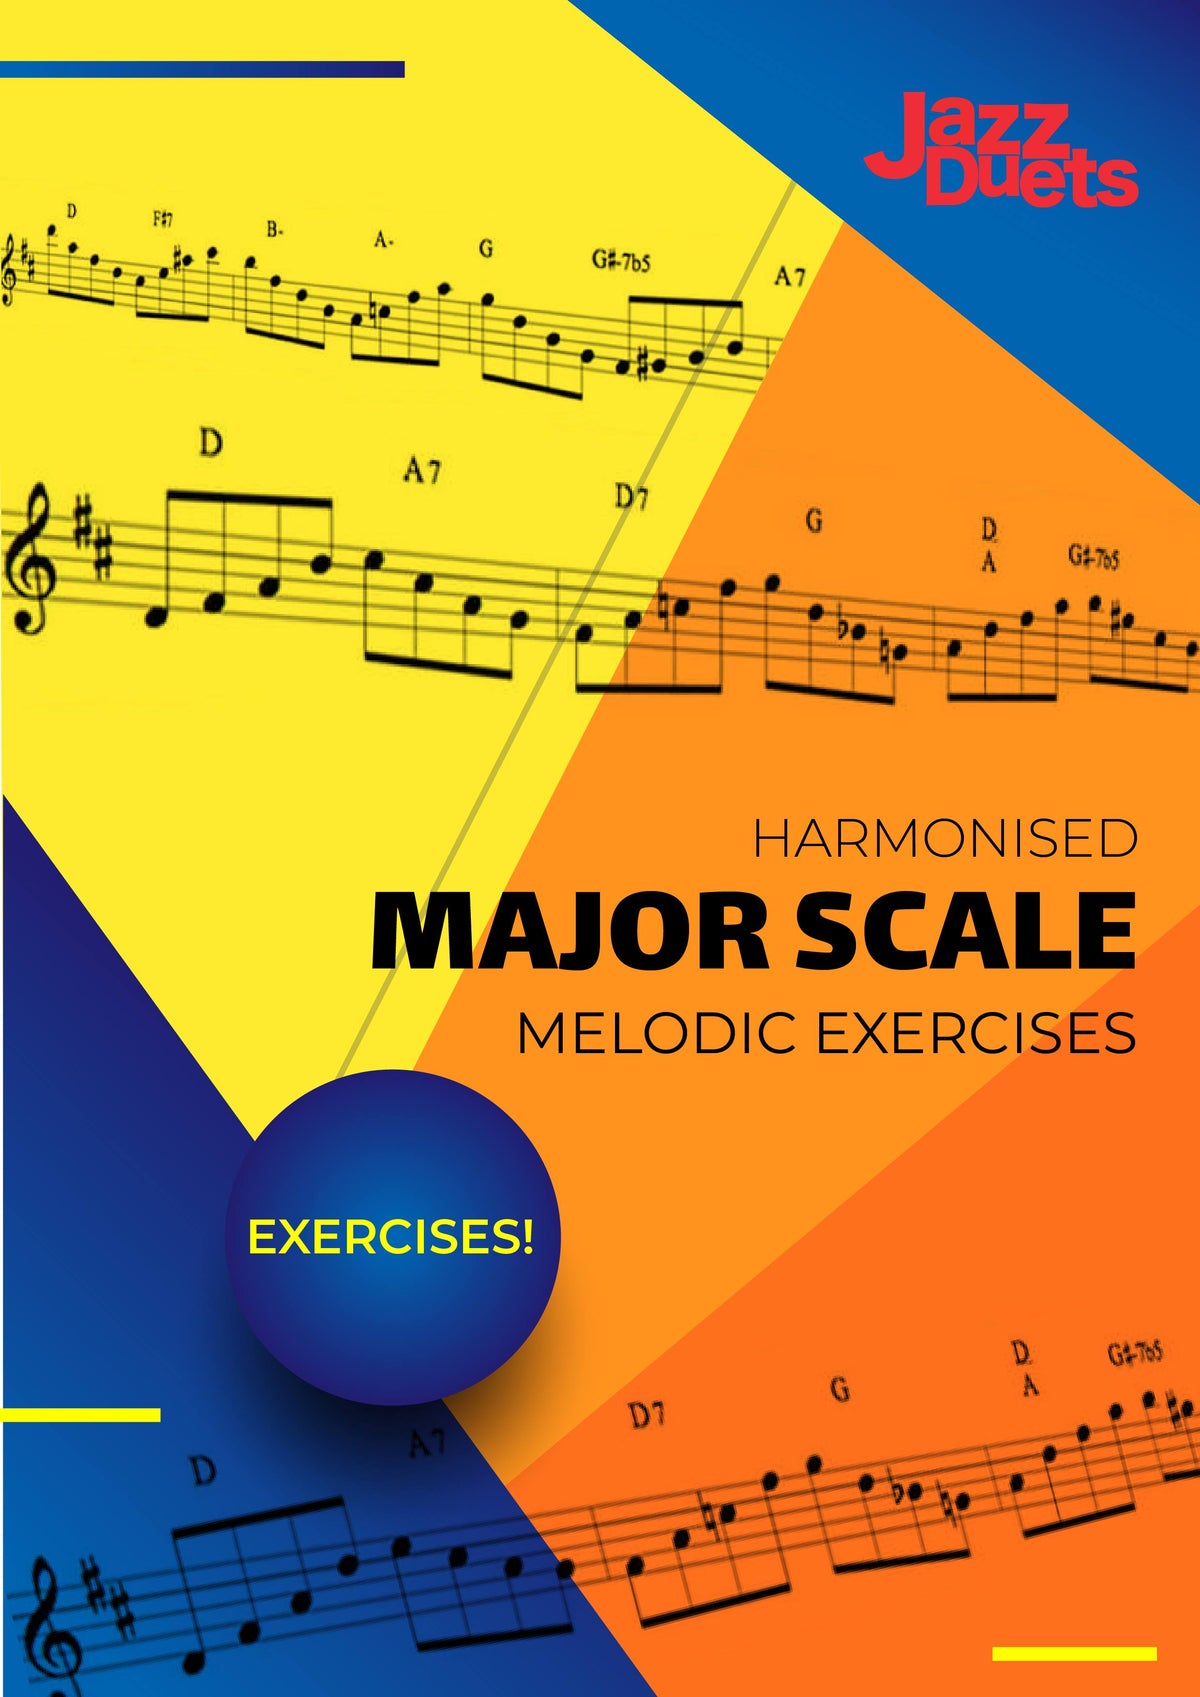 Harmonised major scale melodic exercises -all instruments-jazzduets